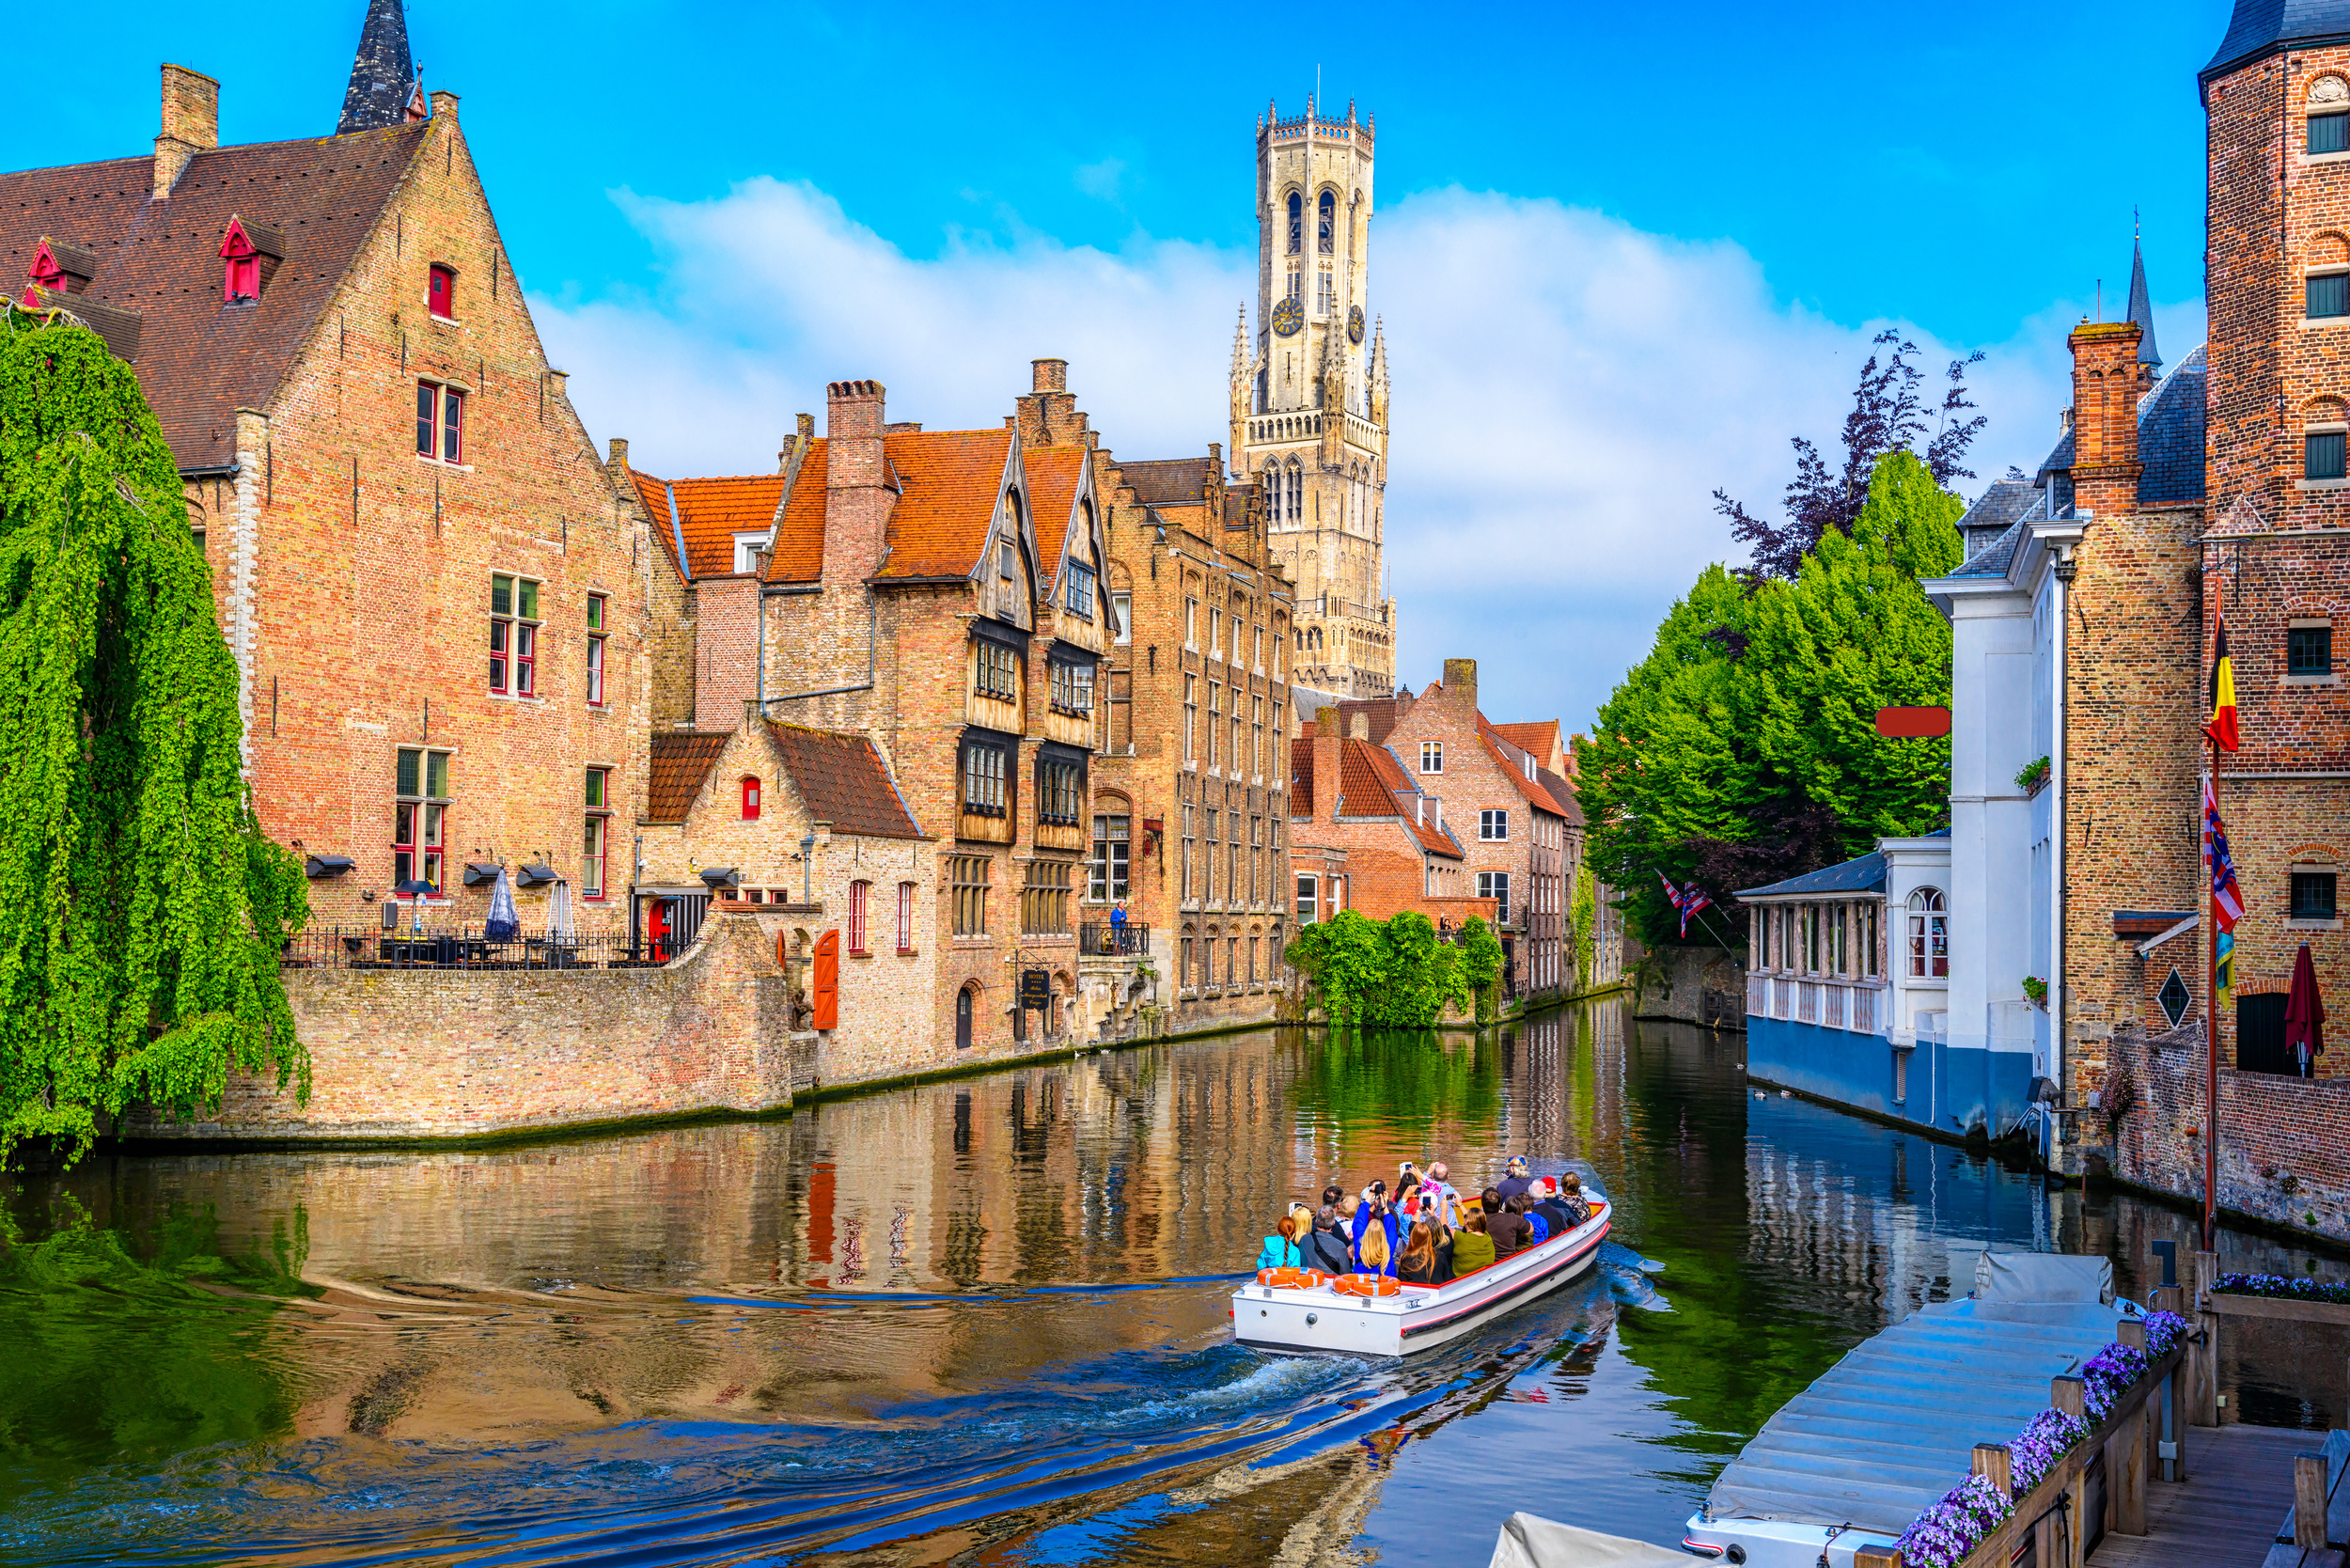 <p>Many prefer this adorable Medieval town to Belgium’s capital, Brussels. The quaint cobblestone streets, college-town feel, and an ambiance on even the rainiest day make it a wonderful place to spend some time. Wander a beer museum, visit a tasting room, and enjoy a stroll along the canal.</p><p><a href='https://www.msn.com/en-us/community/channel/vid-cj9pqbr0vn9in2b6ddcd8sfgpfq6x6utp44fssrv6mc2gtybw0us'>Follow us on MSN to see more of our exclusive lifestyle content.</a></p>